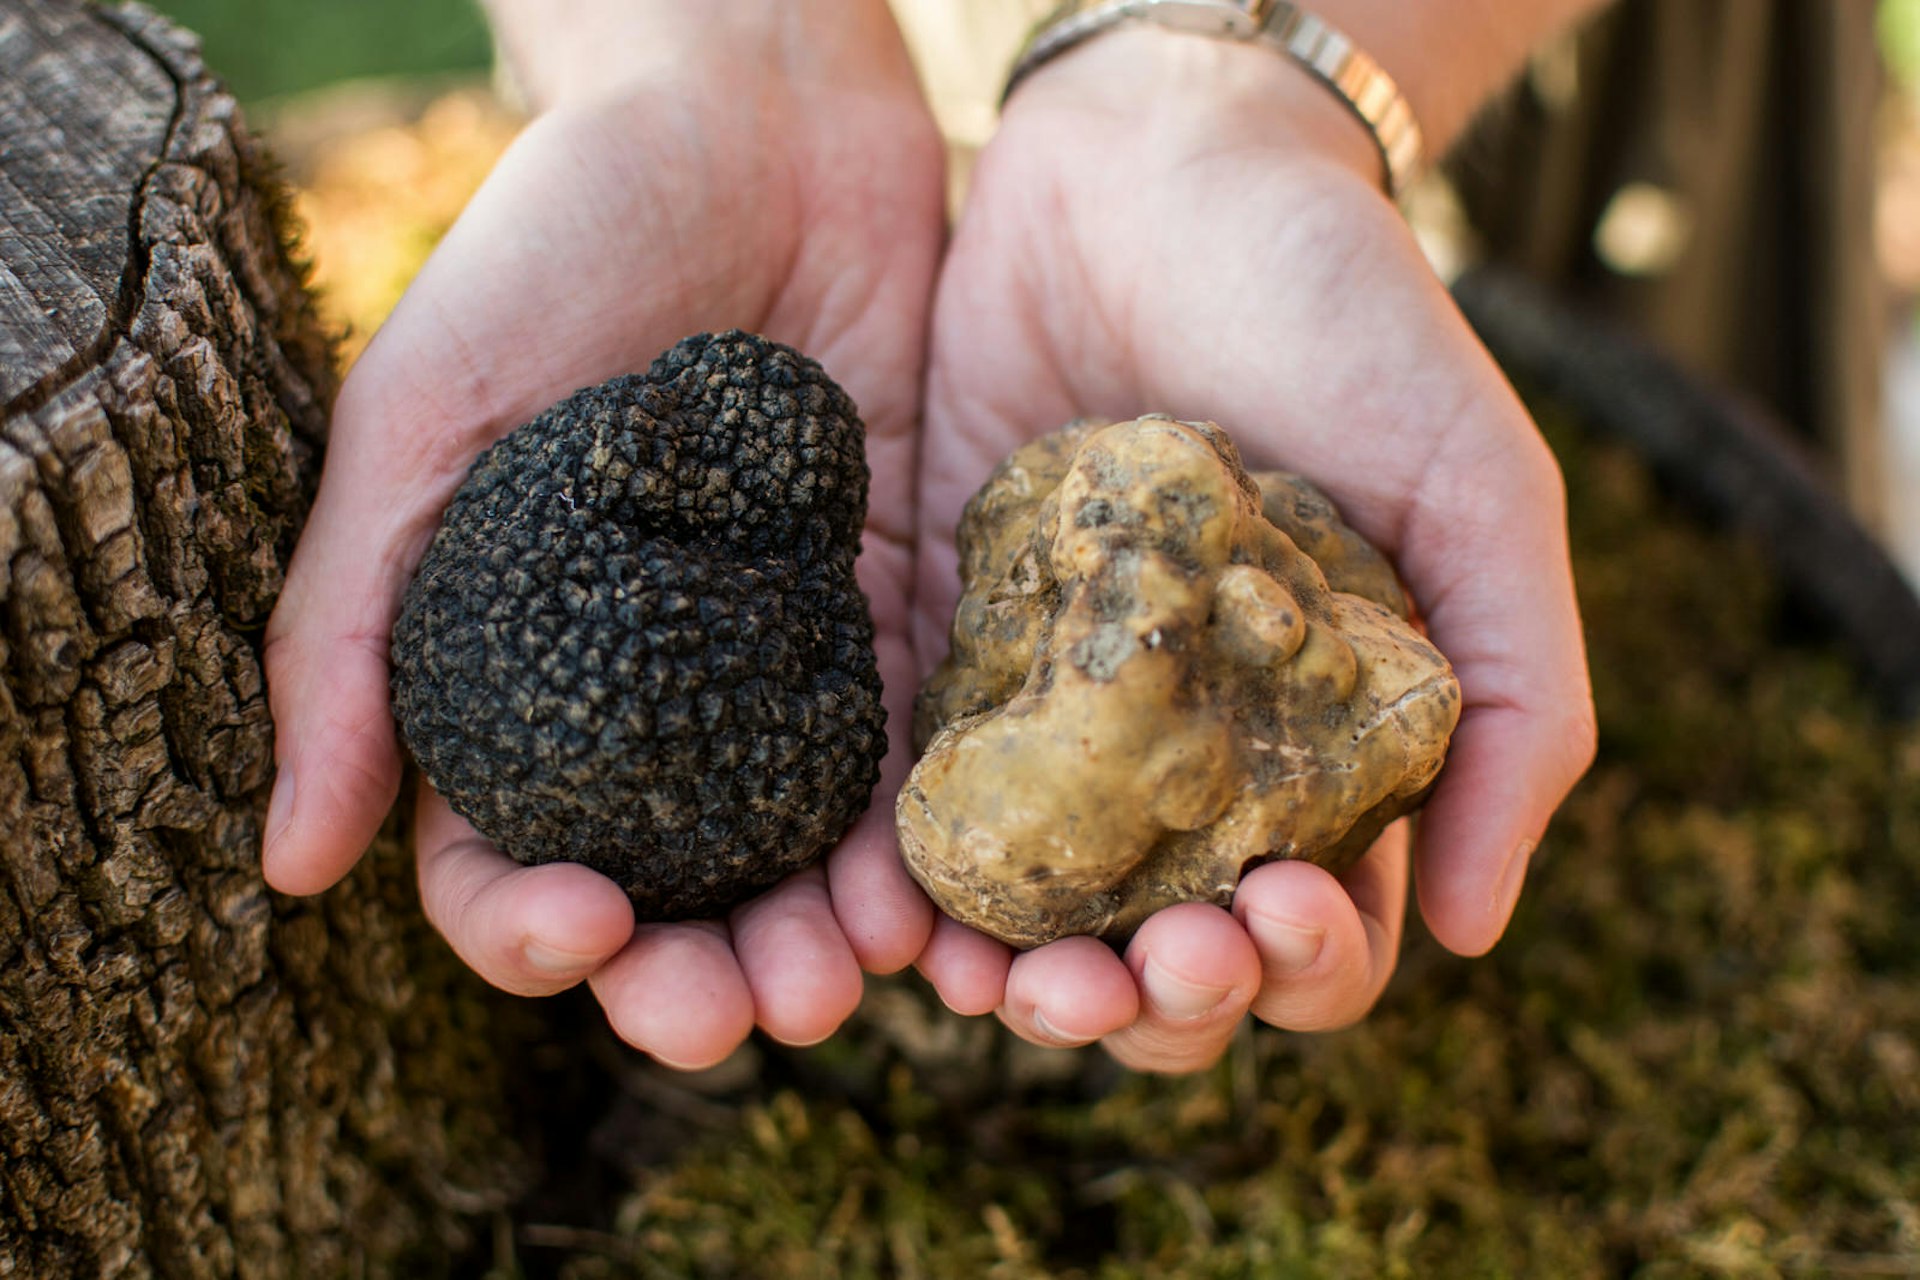 Two hands hold large black and white truffles